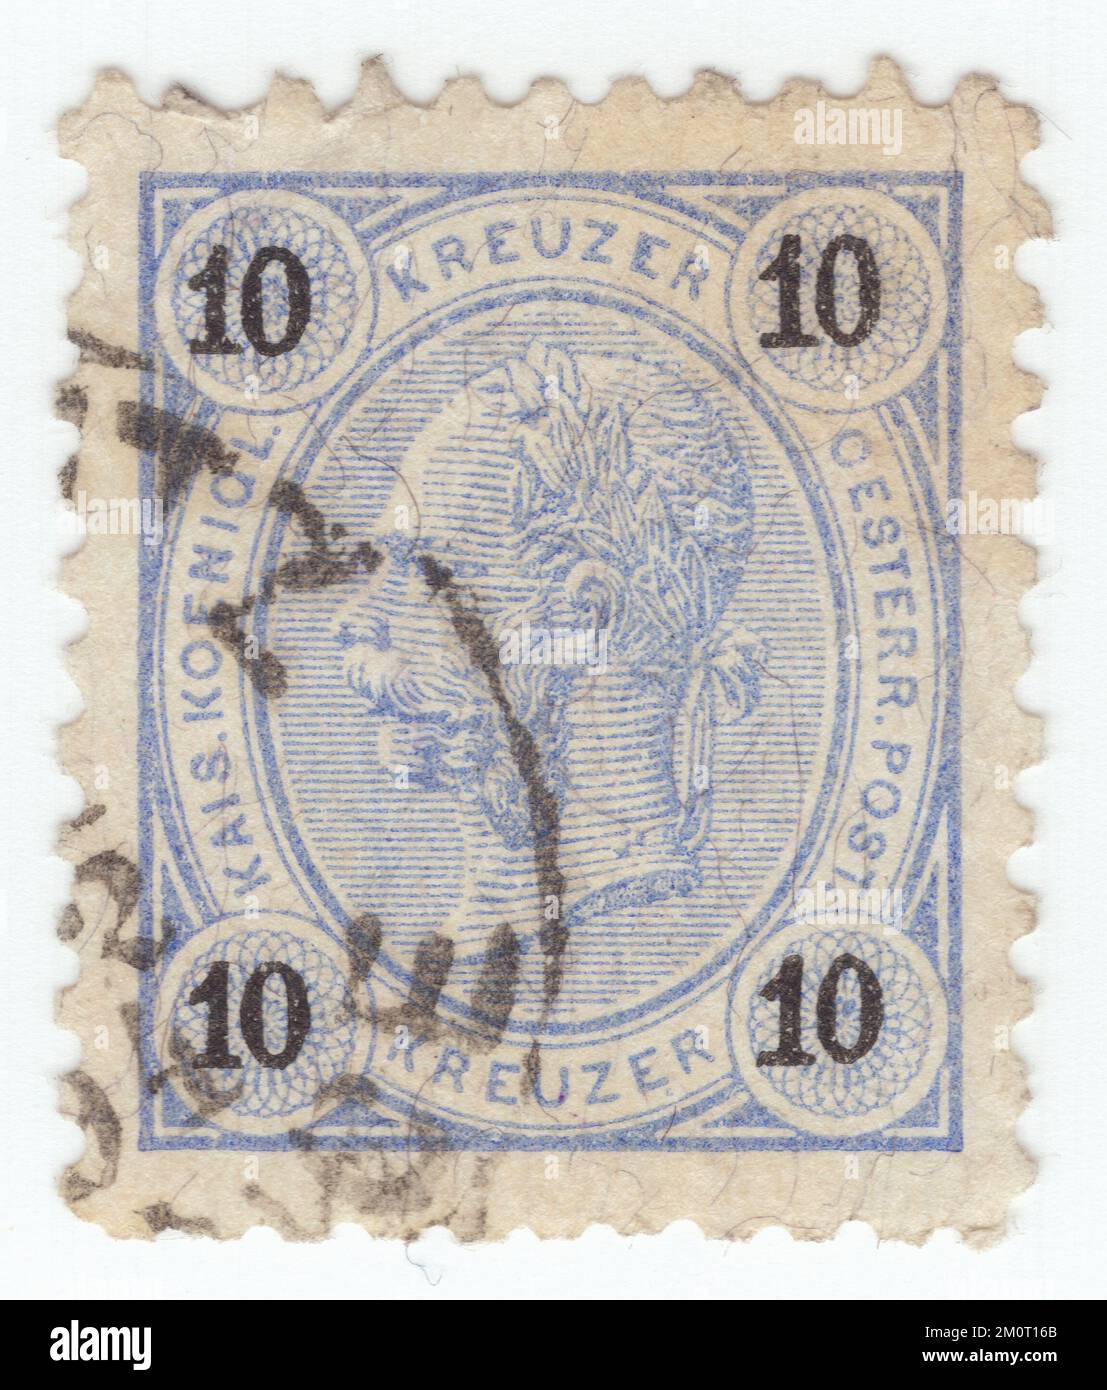 AUSTRIA — 1890: An 10 kreuzer ultramarine postage stamp depicting Embossed portrait of young Austrian Monarch Emperor Franz Josef. Franz Joseph I or Francis Joseph I was Emperor of Austria, King of Hungary, and the other states of the Habsburg monarchy from 2 December 1848 until his death on 21 November 1916. In the early part of his reign, his realms and territories were referred to as the Austrian Empire, but were reconstituted as the dual monarchy of the Austro-Hungarian Empire in 1867. From 1 May 1850 to 24 August 1866, Franz Joseph was also President of the German Confederation Stock Photo